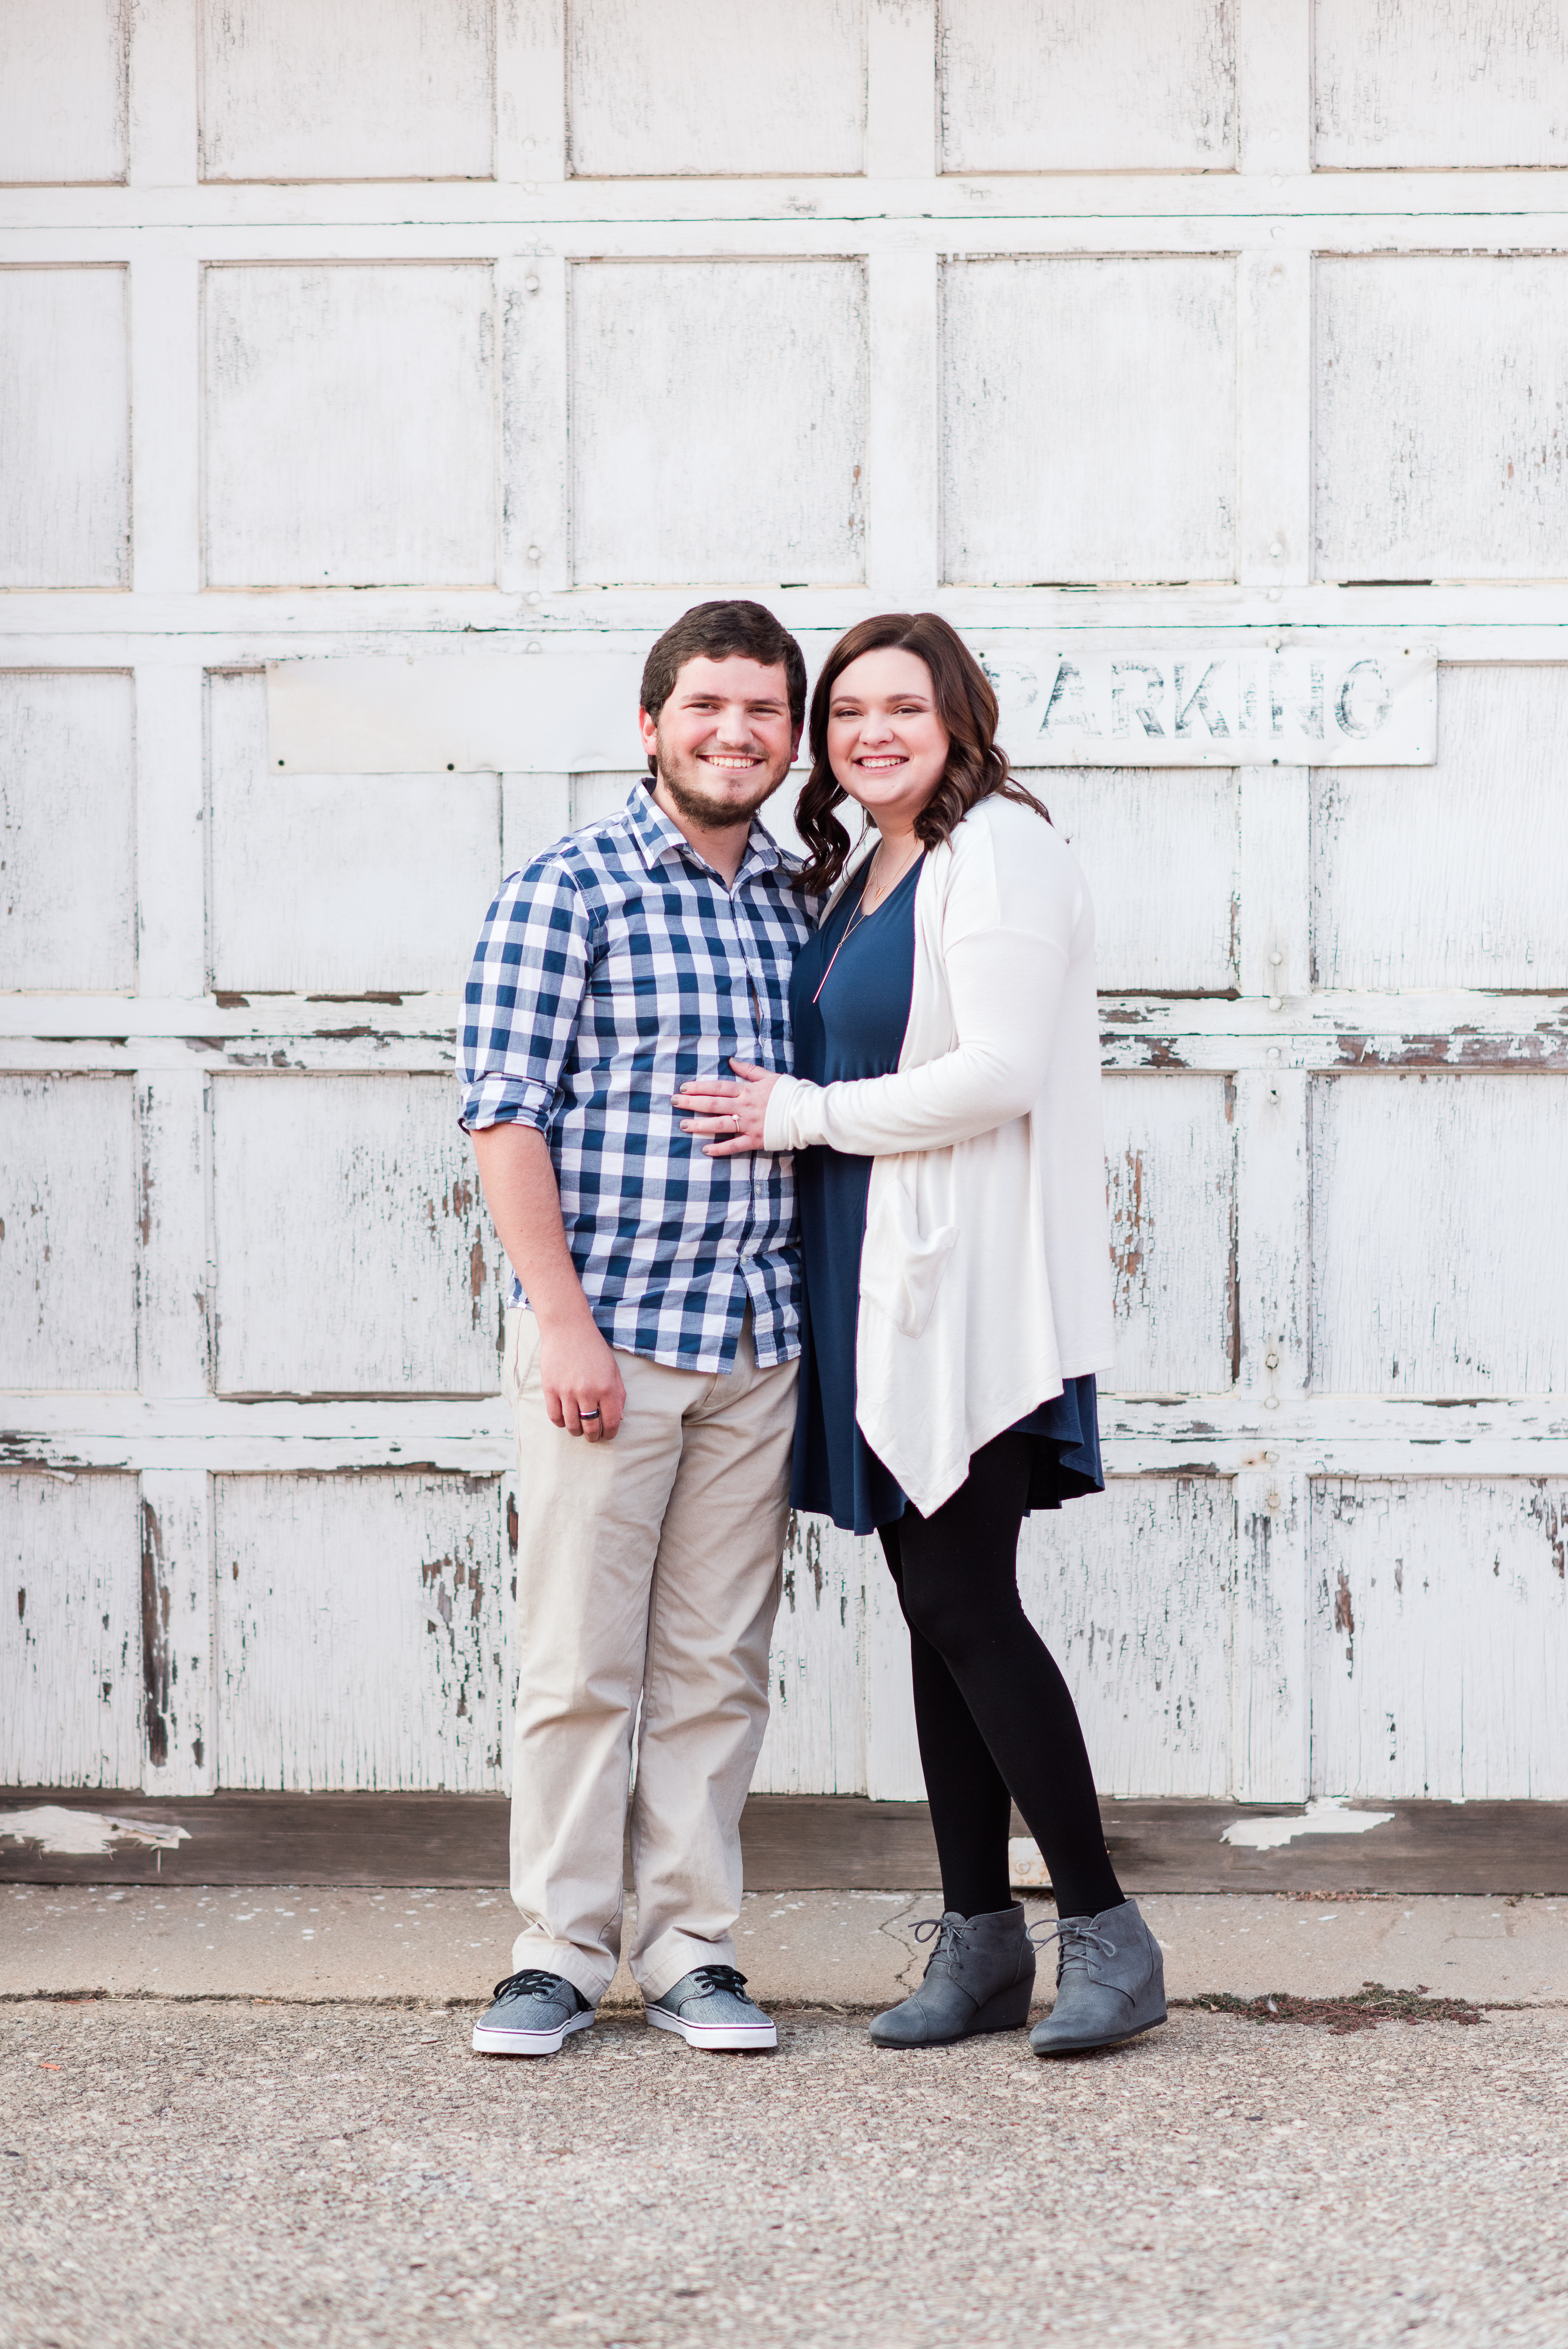 Downtown Greer, South Carolina Engagement Session